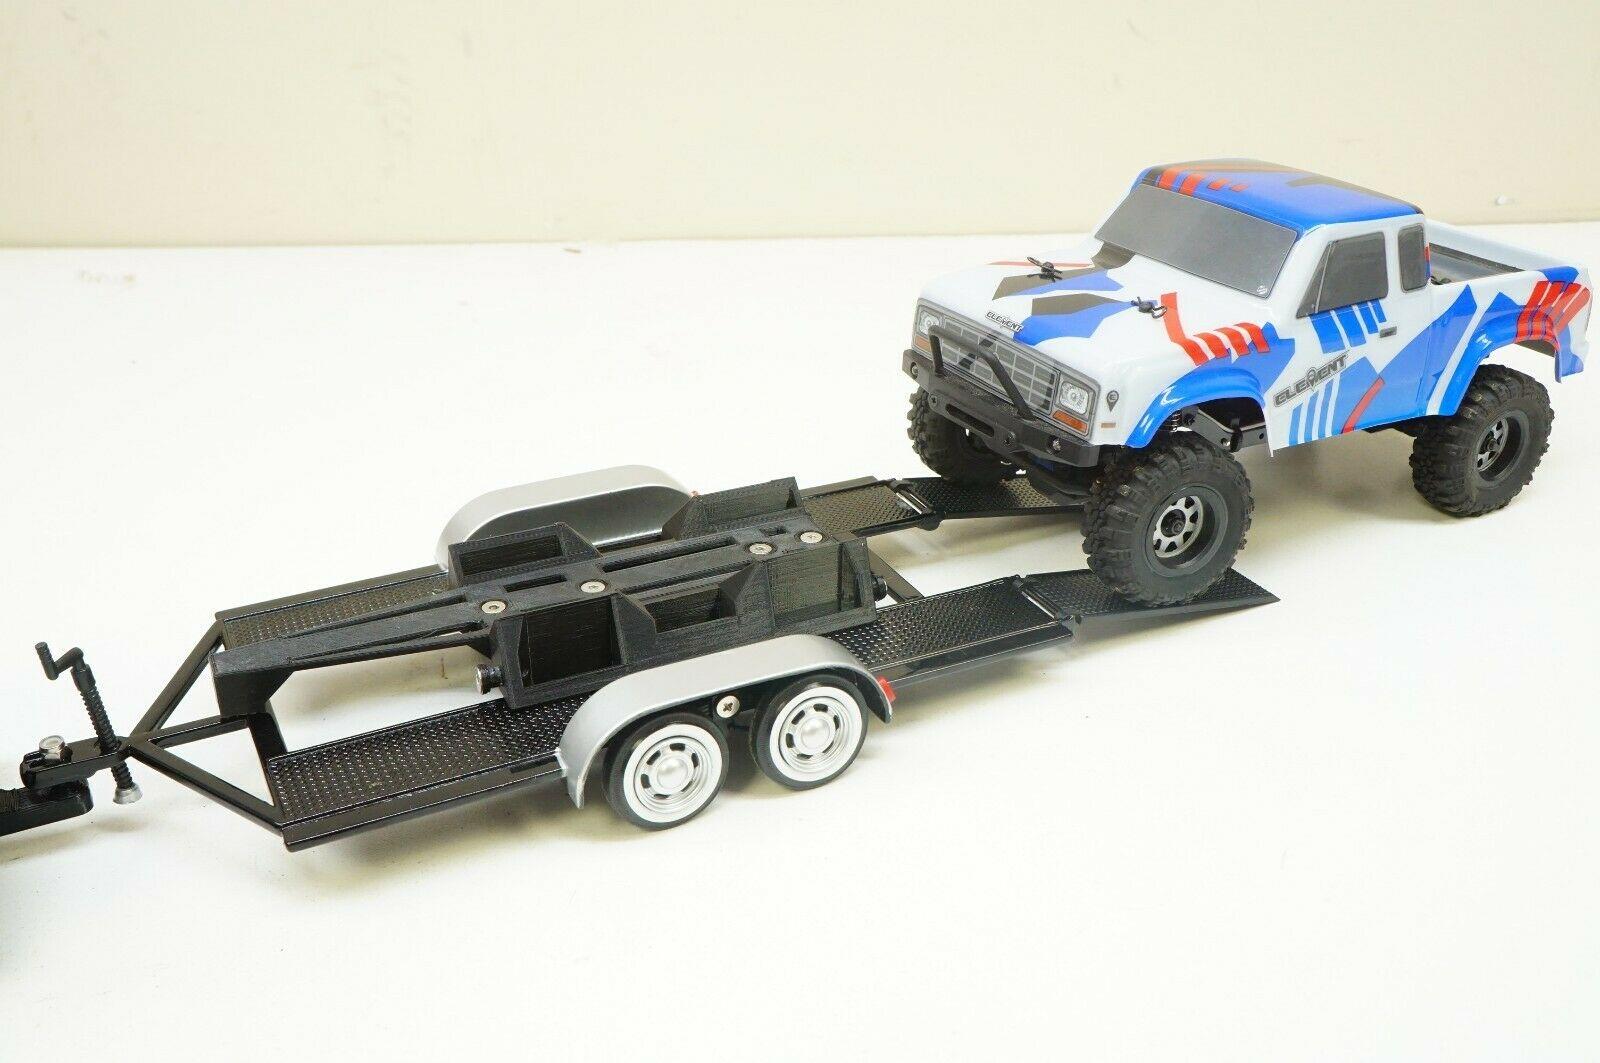 Rc Truck With Trailer And Boat: Toy market offers variety of RC truck with trailer and boat options.